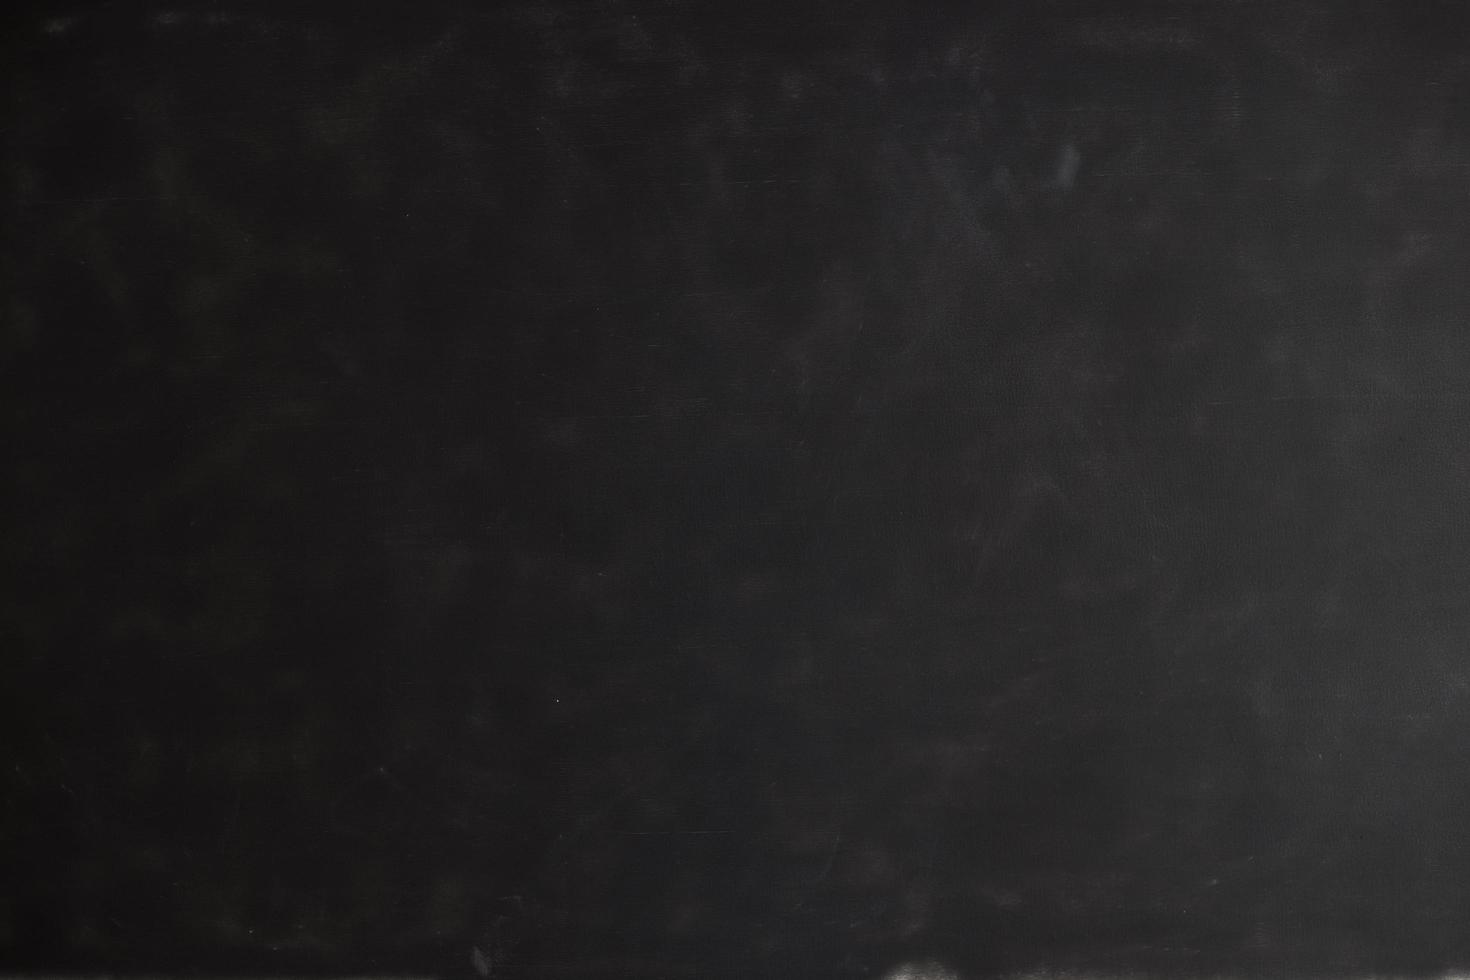 Chalk rubbed out on blackboard photo